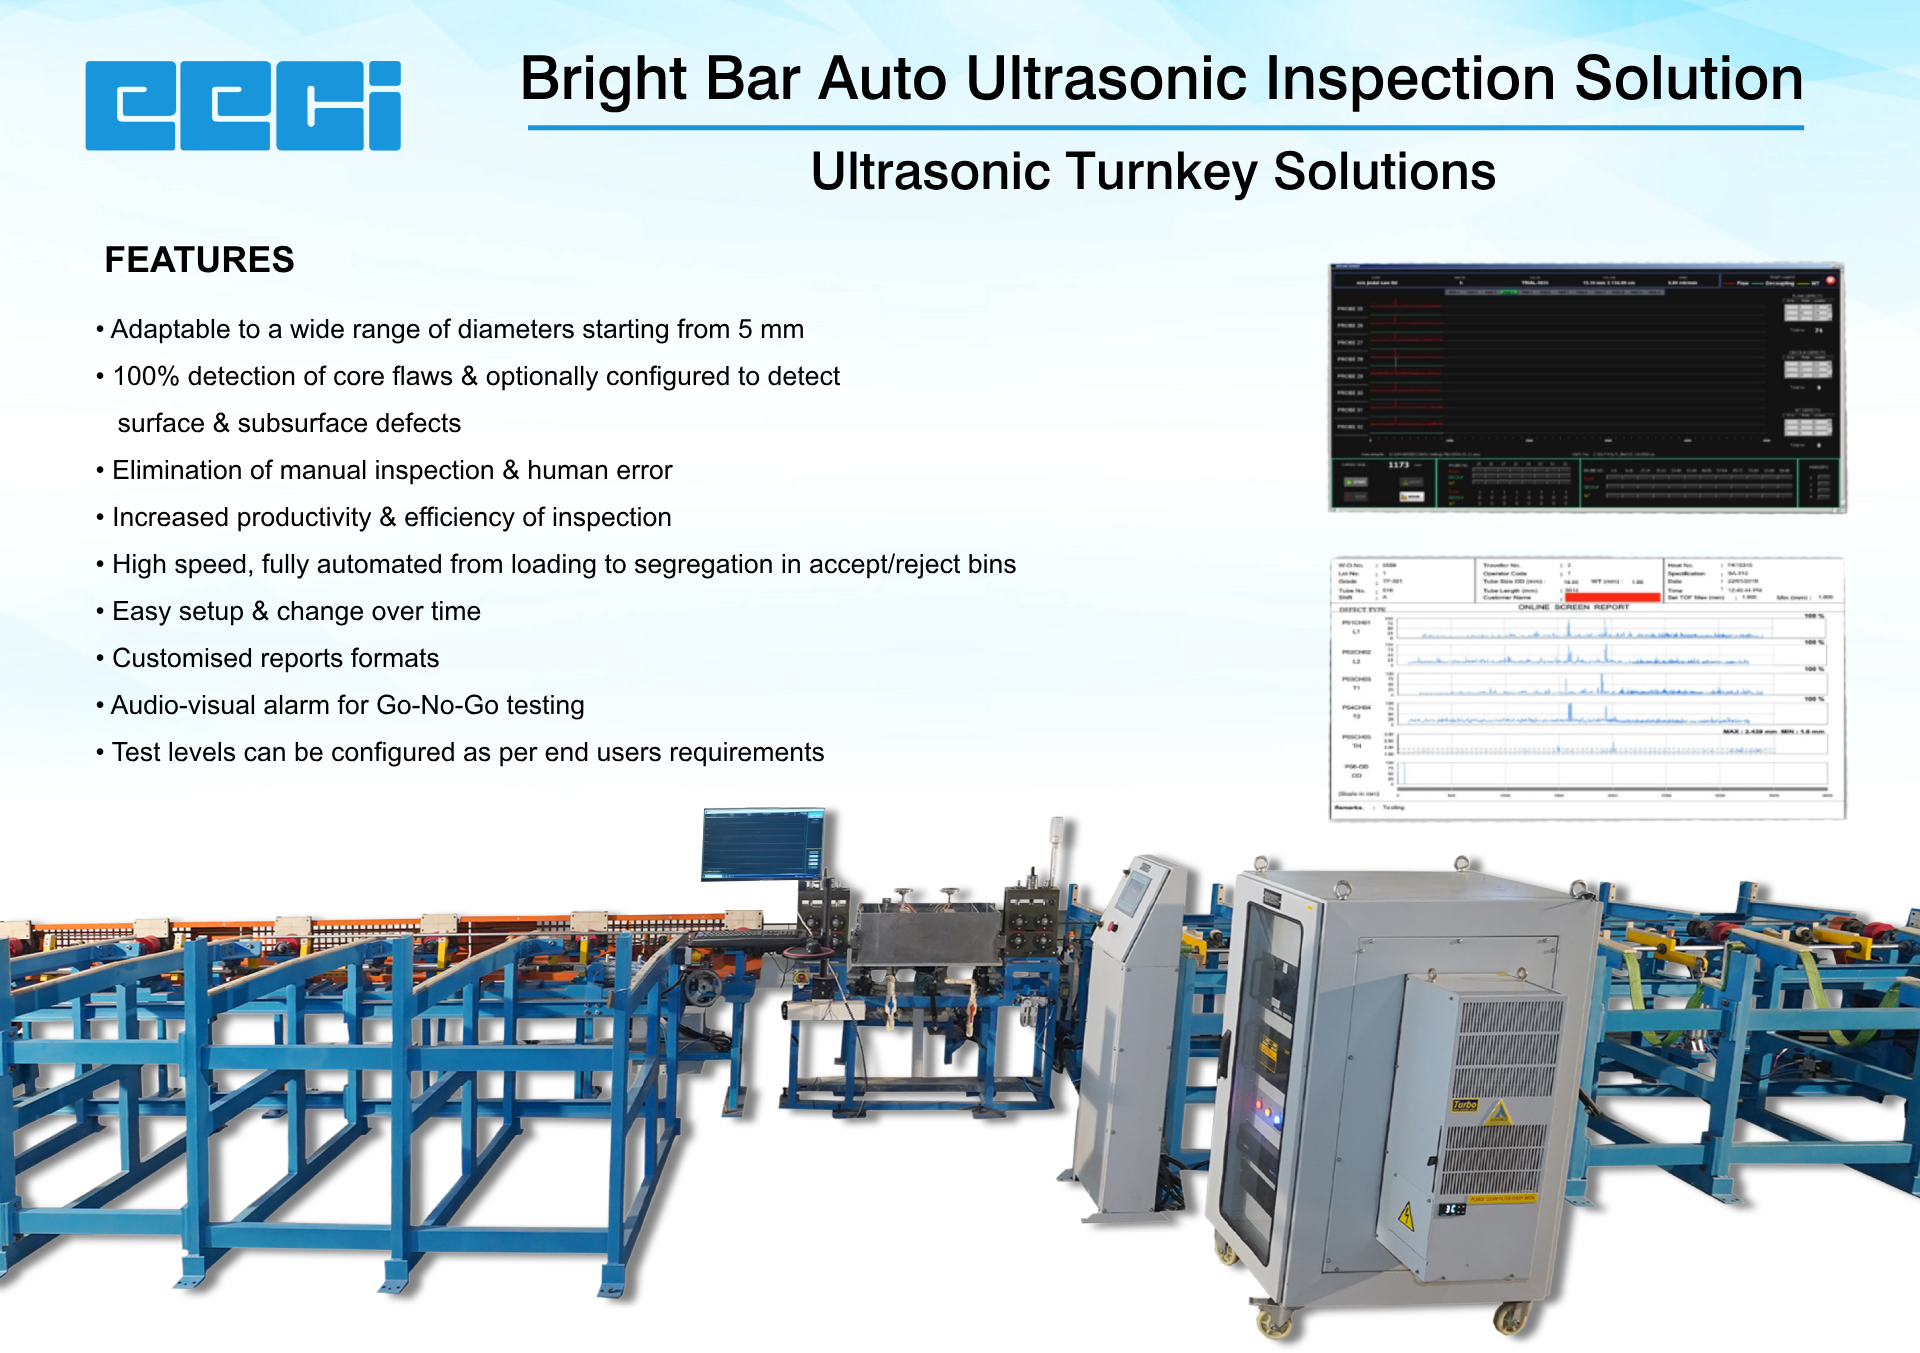 Enhancing Quality Control with EECI’s Bright Bar Auto Ultrasonic Inspection Solution